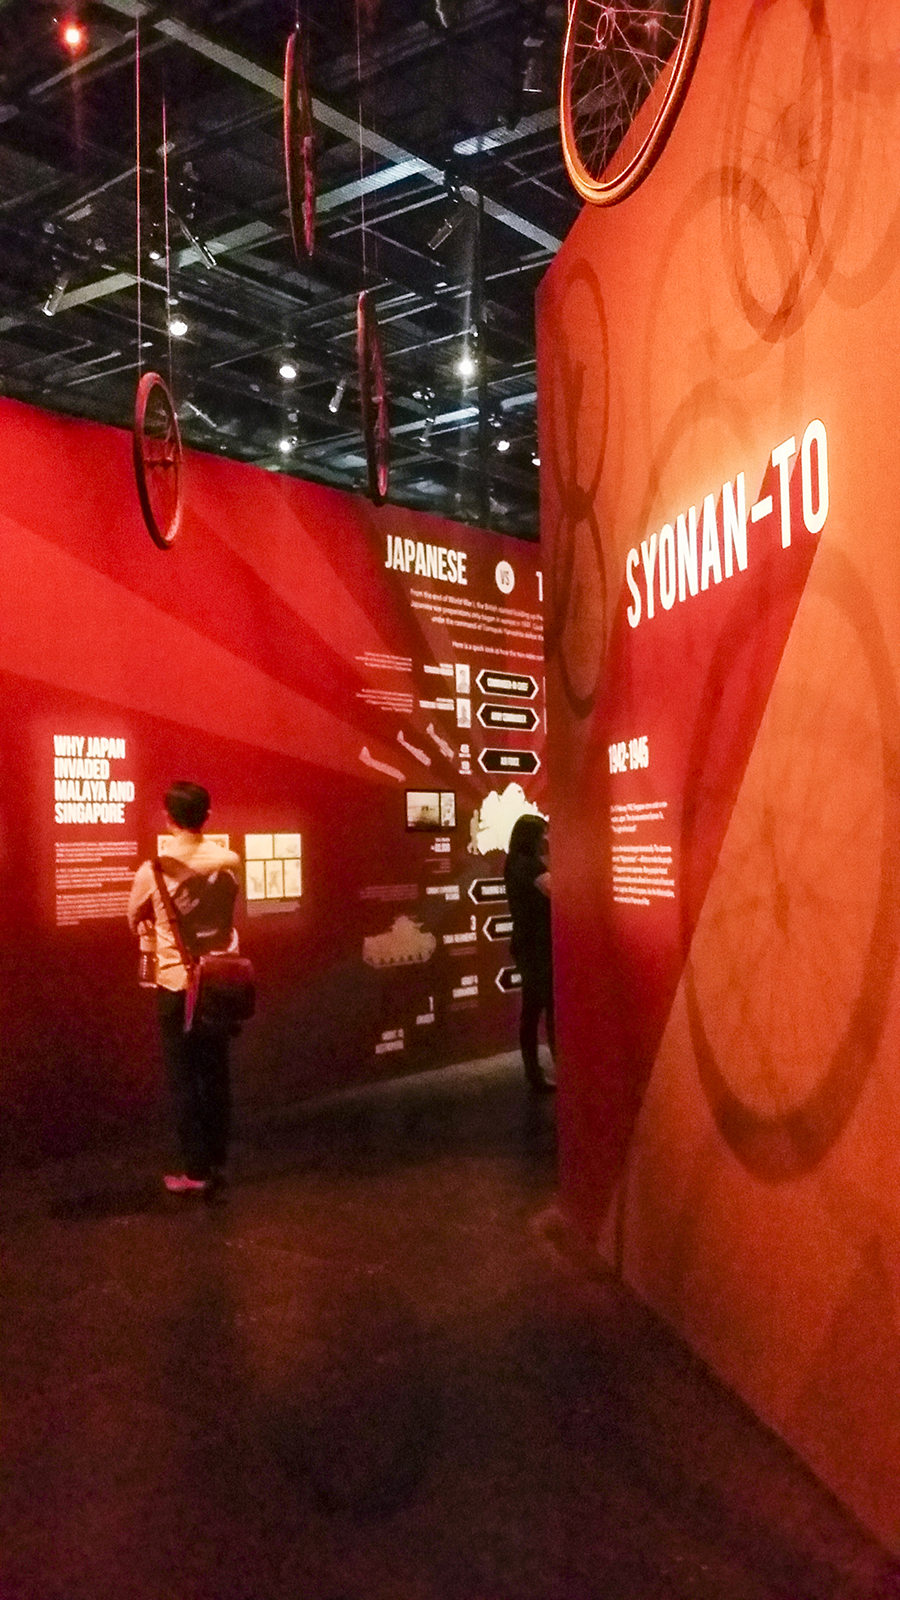 Japanese occupation period during World War II at the Singapura: 700 Years exhibition at the National Museum of Singapore.